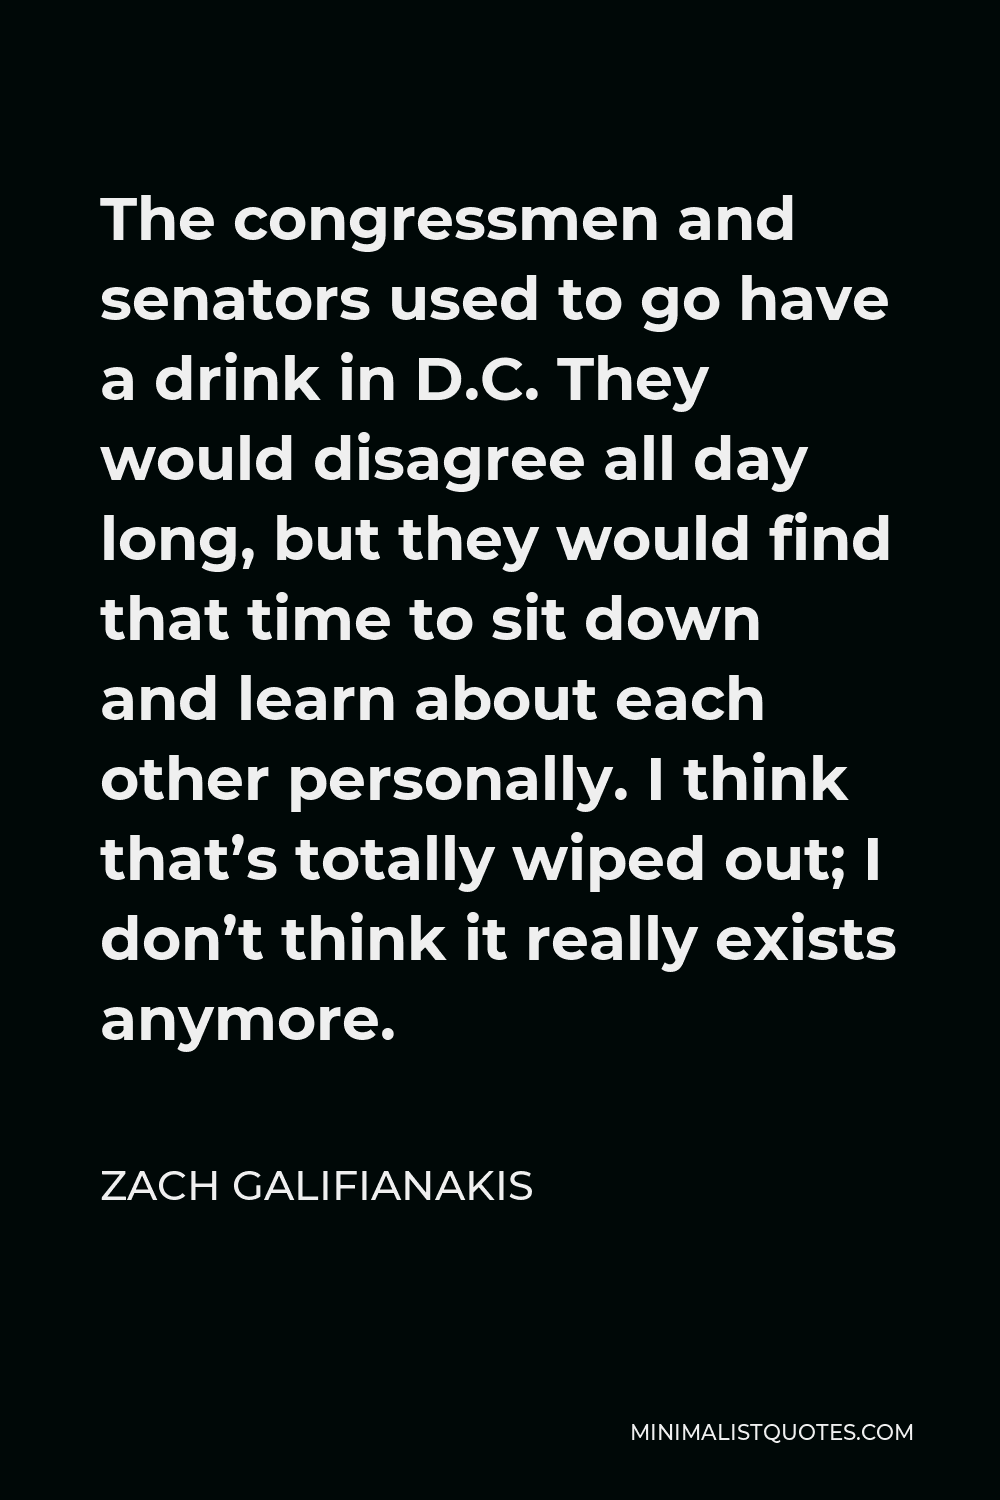 Zach Galifianakis Quote - The congressmen and senators used to go have a drink in D.C. They would disagree all day long, but they would find that time to sit down and learn about each other personally. I think that’s totally wiped out; I don’t think it really exists anymore.